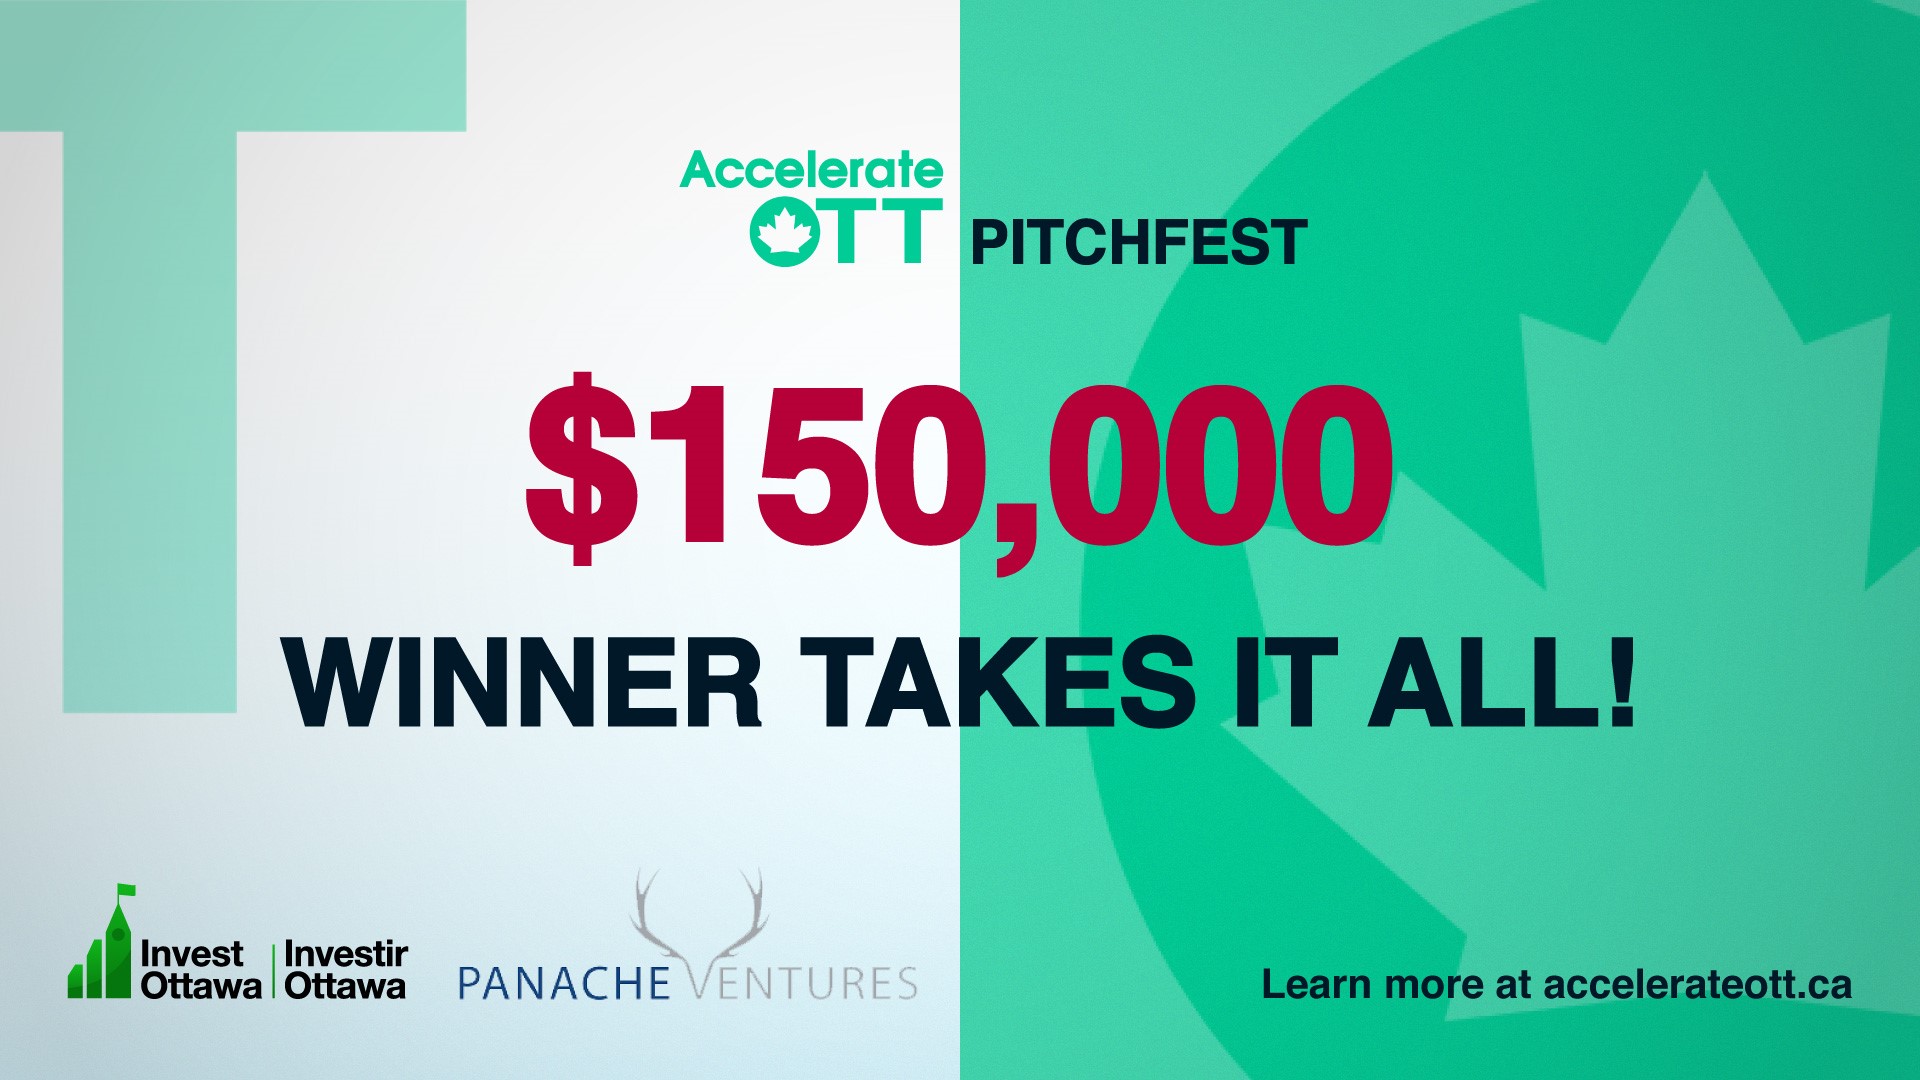 AccelerateOTT Pitch Competition. $150,000 Winner Takes All!